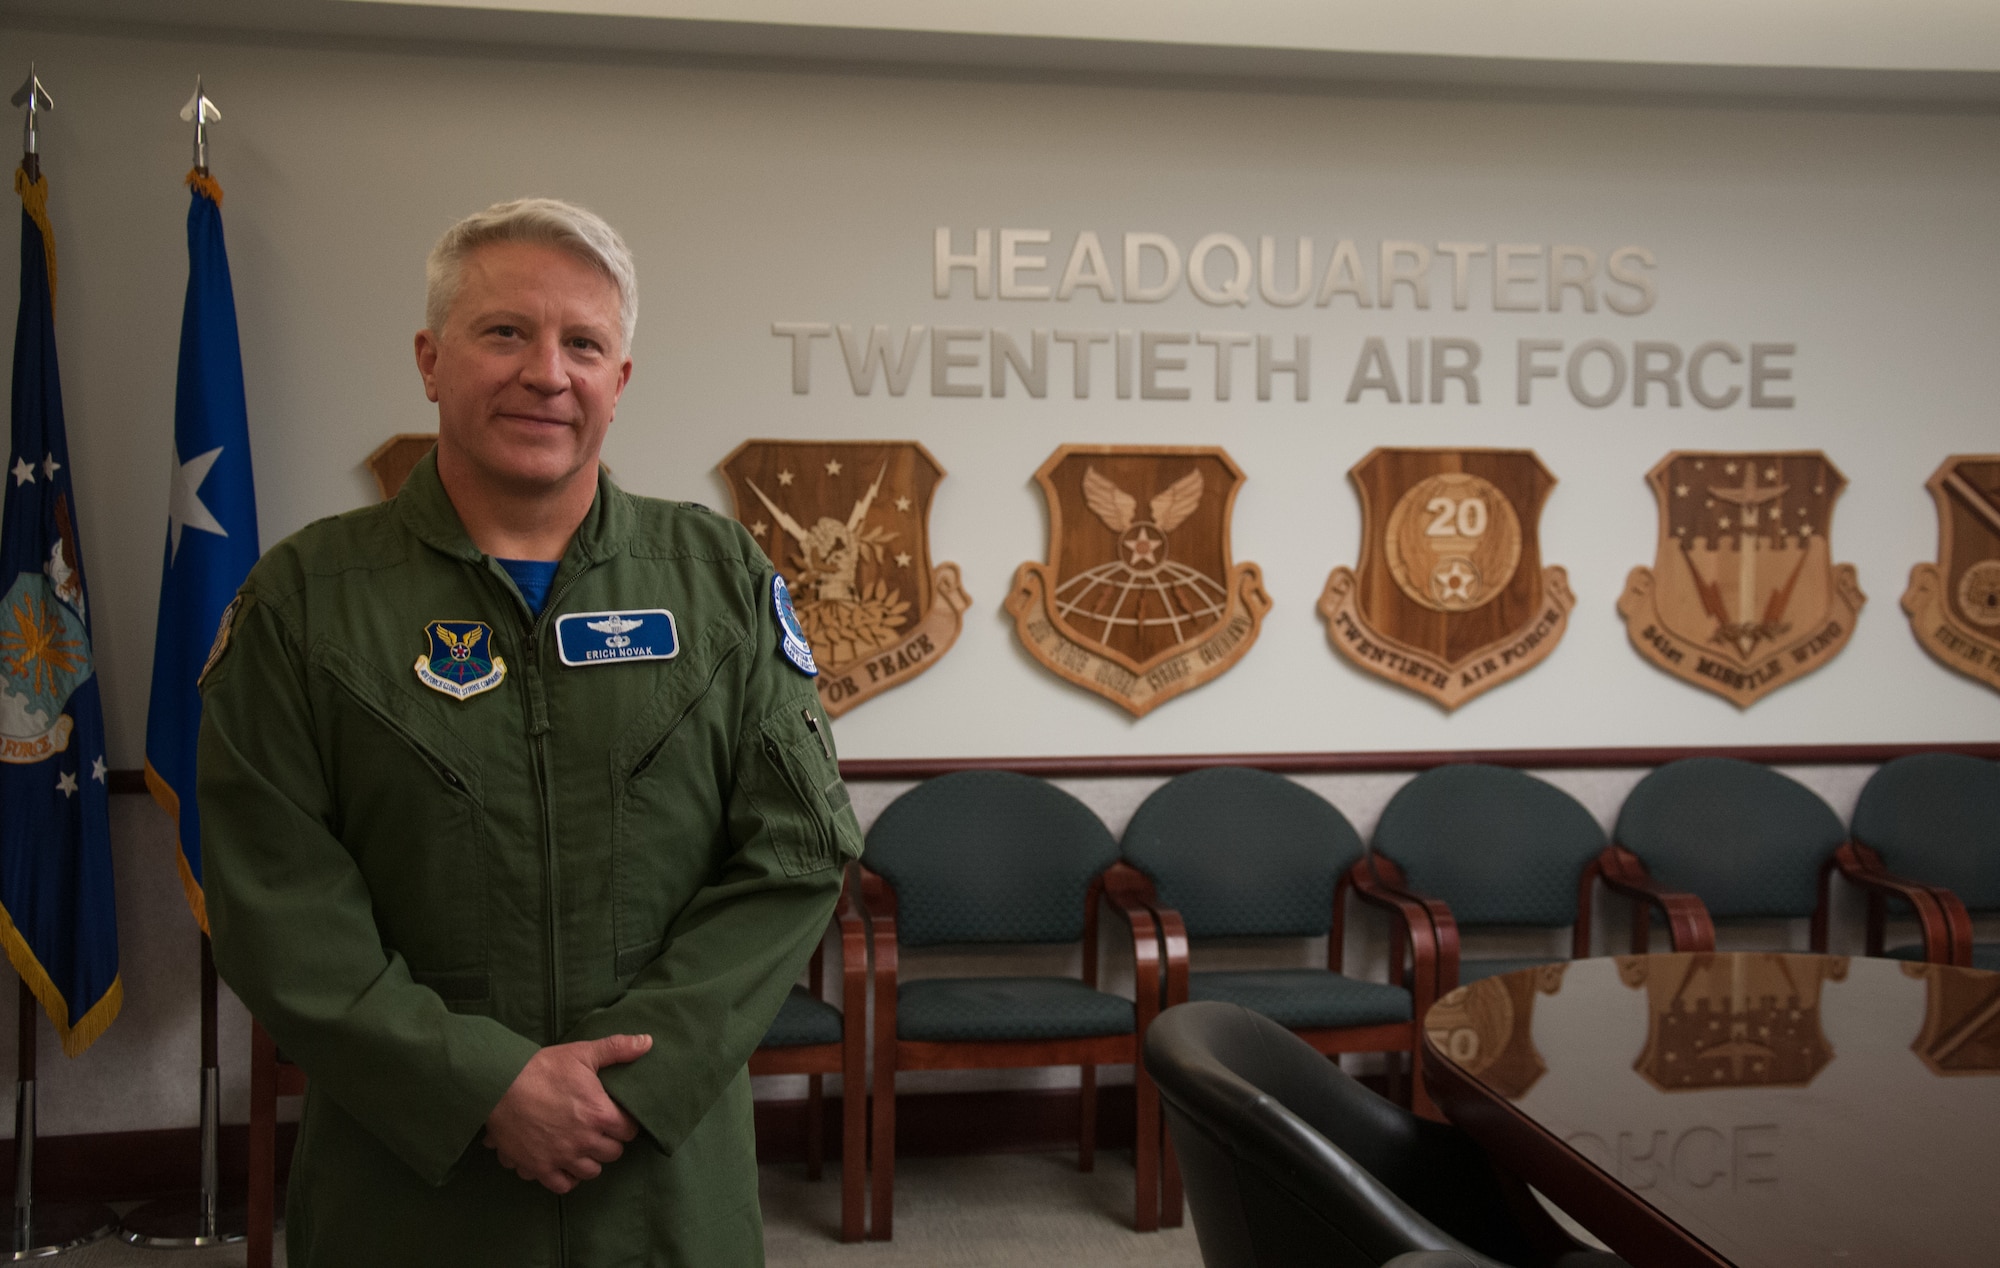 Brig. Gen. Erich Novak, Mobilization Assistant (MA) to the 20th Air Force commander, poses for a photo in the 20th Air Force Headquarters, F. E. Warren Air Force Base, Wyo., Dec. 17, 2019. Novak is leaving 20 AF after serving as the Mobilization Assistant (MA) to the 20 AF Commander for three years.